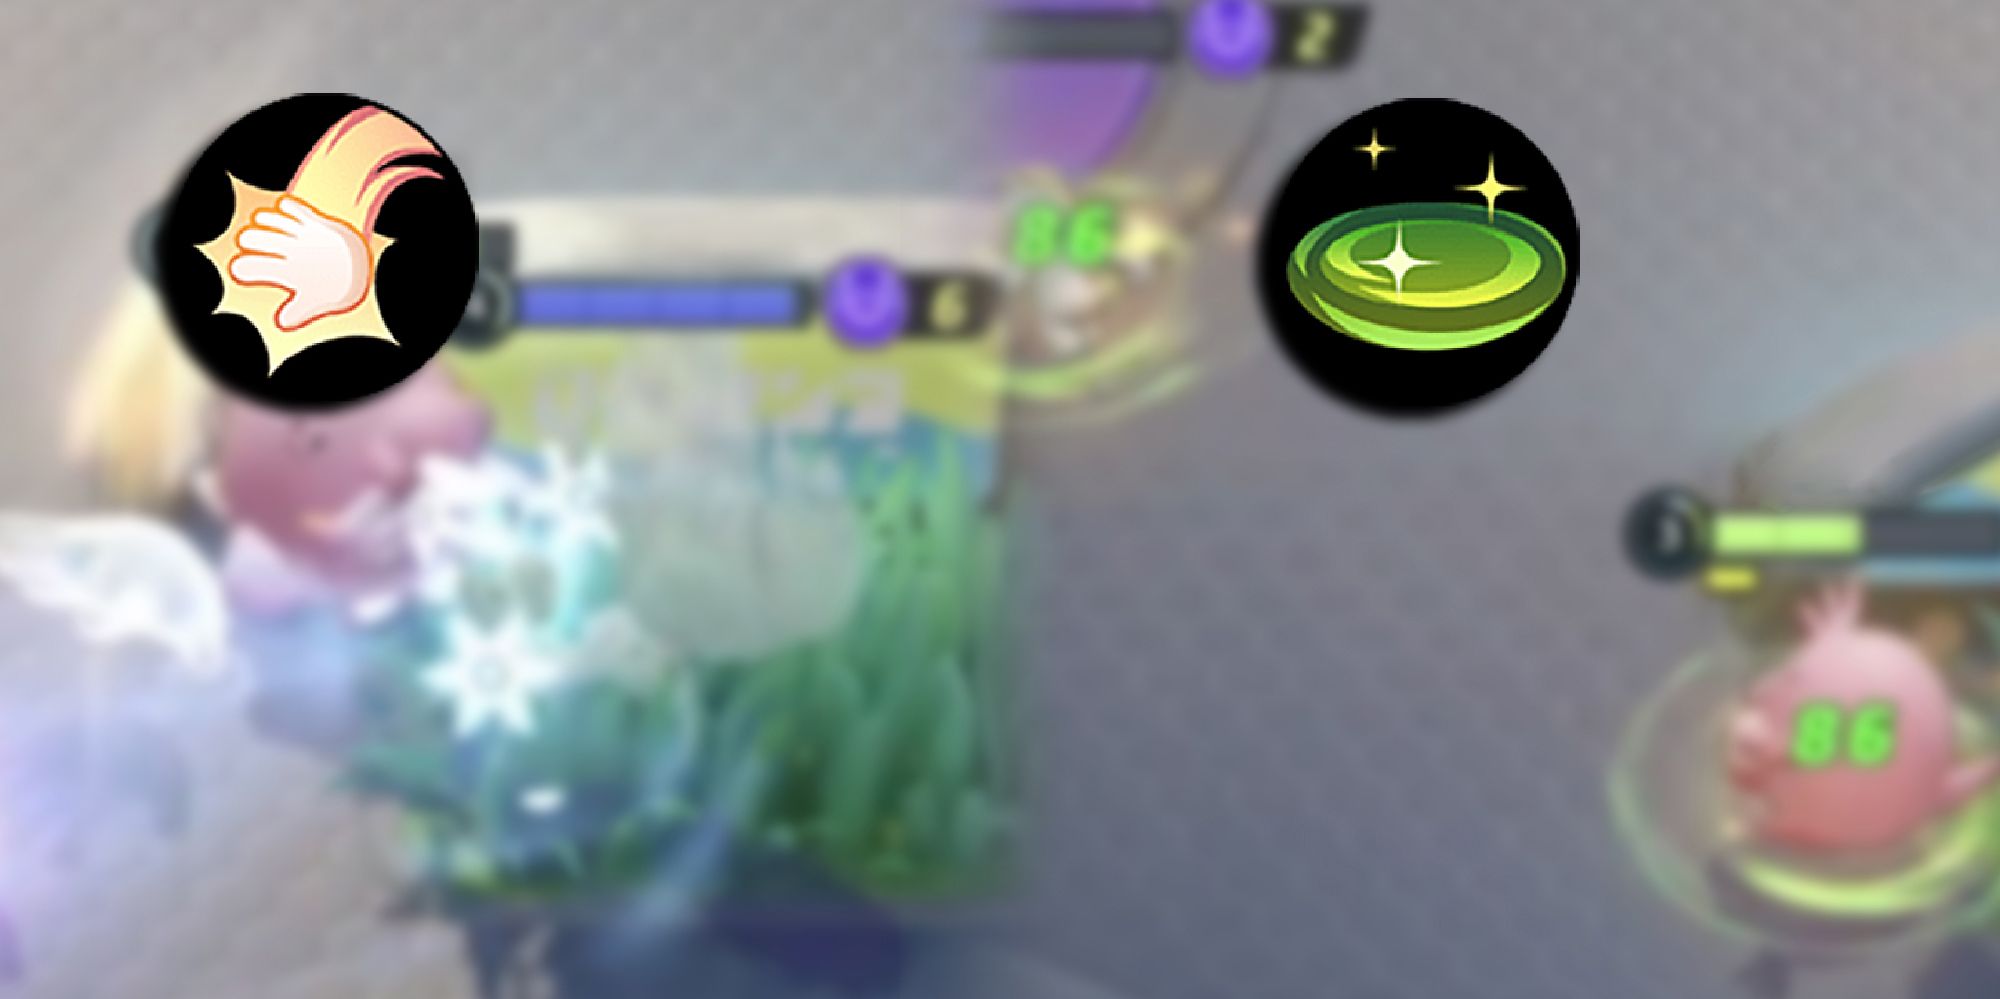 Pokemon Unite -Blurred Images Of Blissey Using Pound And Healing Pulse Side-By-Side With PNGs of Moves Overlaid On Top